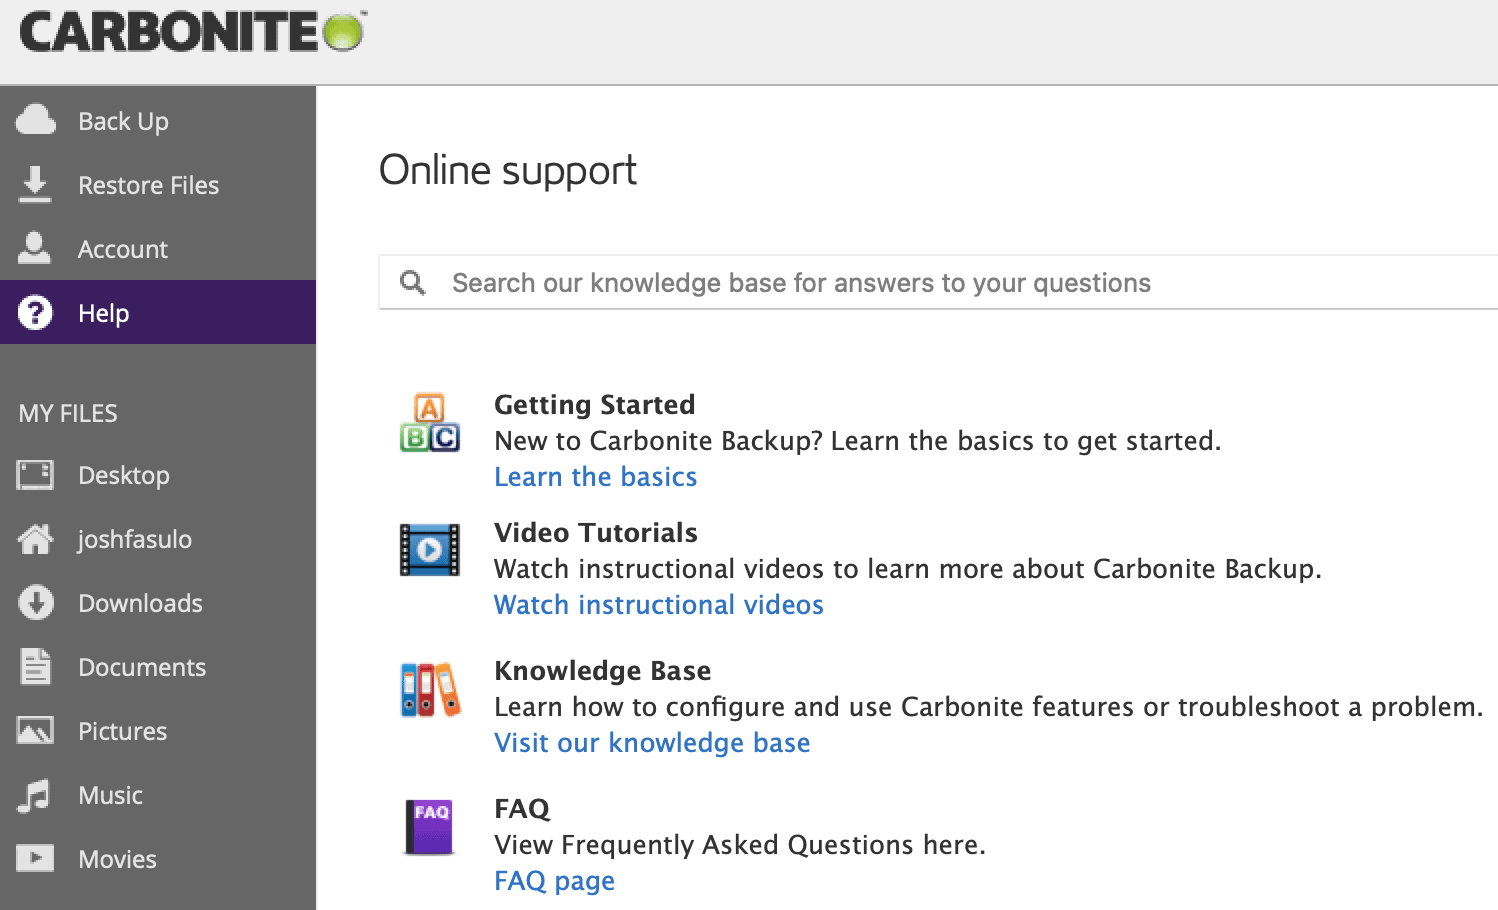 Carbonite online support tools